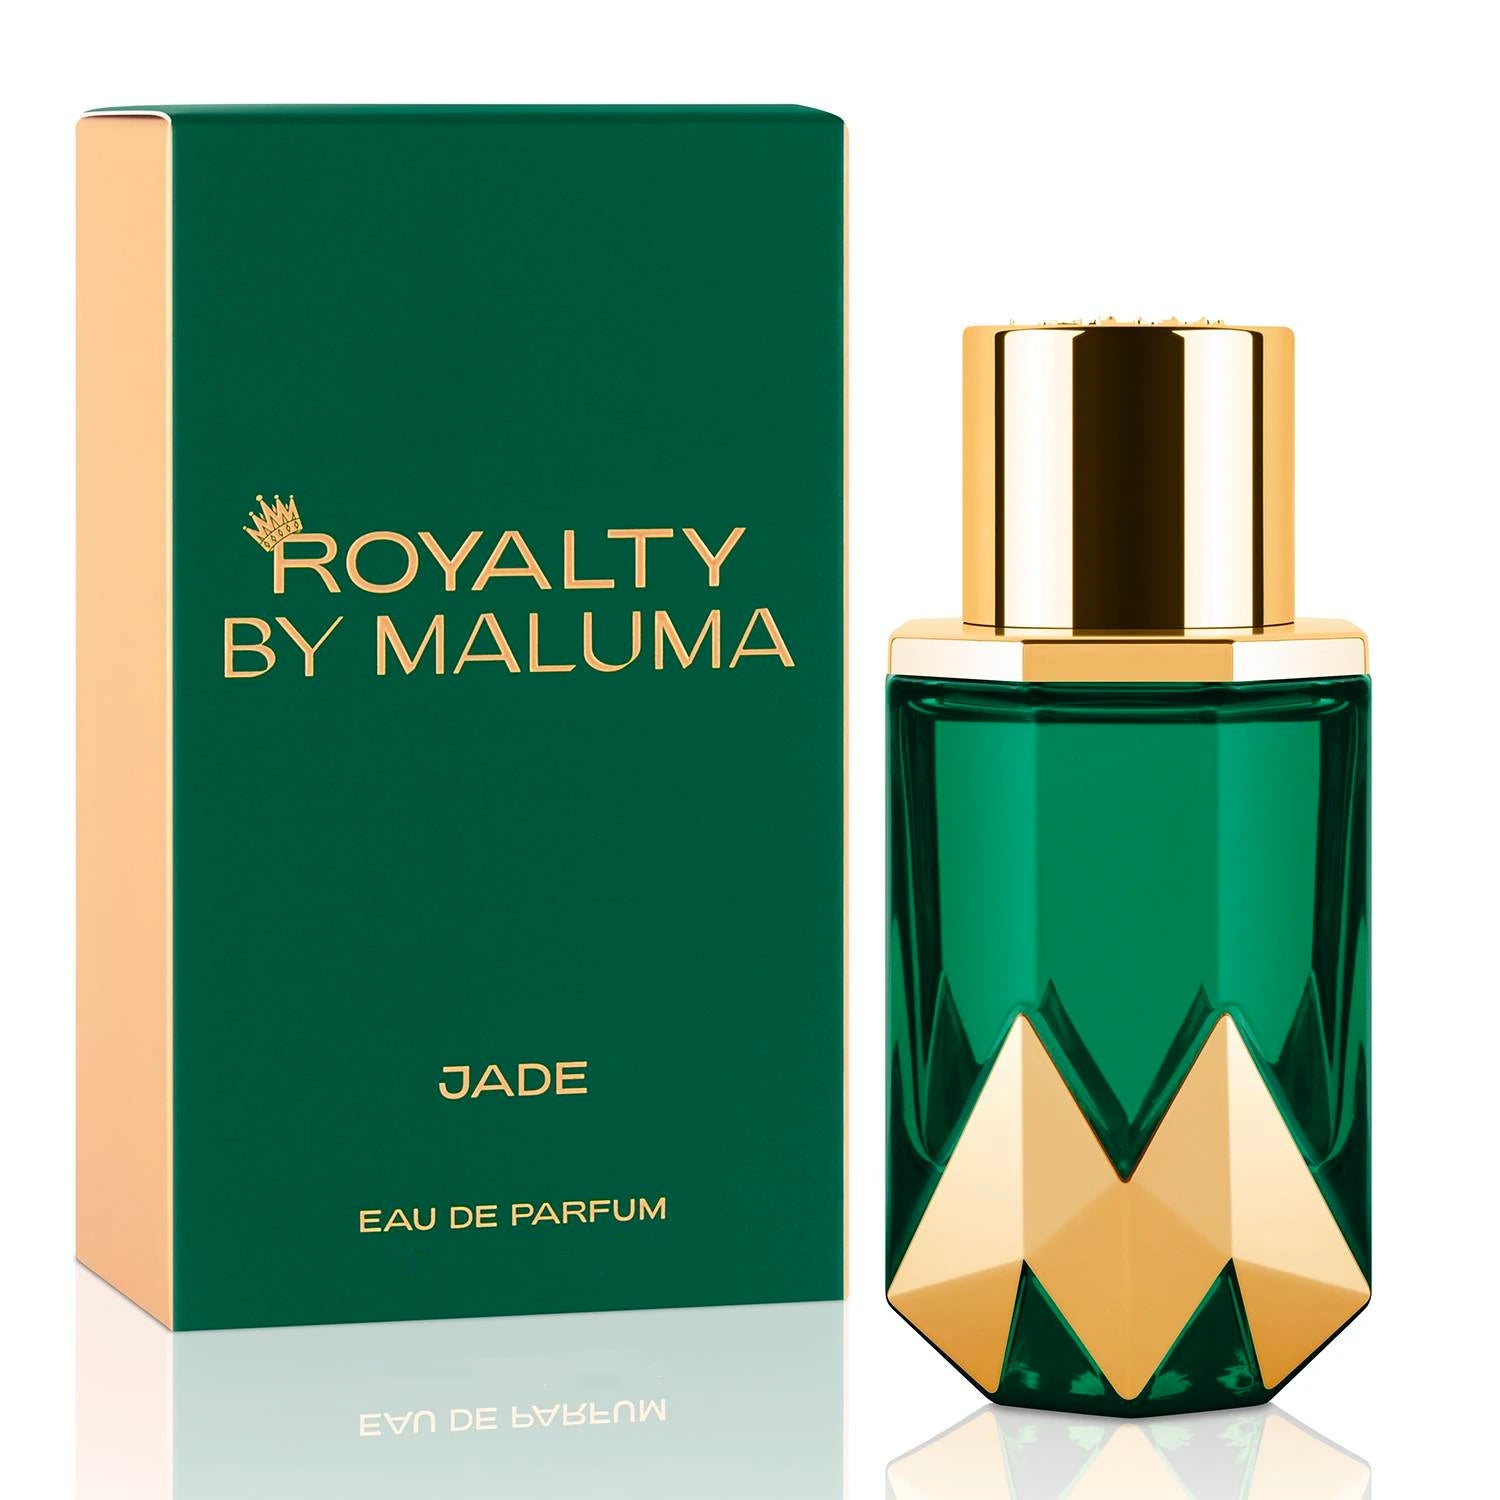 <p>Introducing Jade Royalty, the latest fragrance by Maluma, a luxurious scent for the modern woman. Capturing the essence of sophistication and style, this Chypre Floral fragrance is a blend of Bergamot and Black Currant top notes, Jasmine, Tuberose, and Mahonial middle notes, and Akigalawood, Cacao, and Patchouli base notes, all working together to create a truly unique and alluring aroma. Experience the perfect combination of classic and modern, with Jade Royalty.</p>
<p data-mce-fragment="1">Top: Bergamot &amp; Blackcurrant<br>Middle: Jasmine, Tuberose &amp; Mahonial<br>Base: Akigala Wood, Cocoa &amp; Patchouli</p>
<p data-mce-fragment="1">The Jade stone represents Tranquility and Wisdom. The Queen is a woman of serenity and harmony</p>